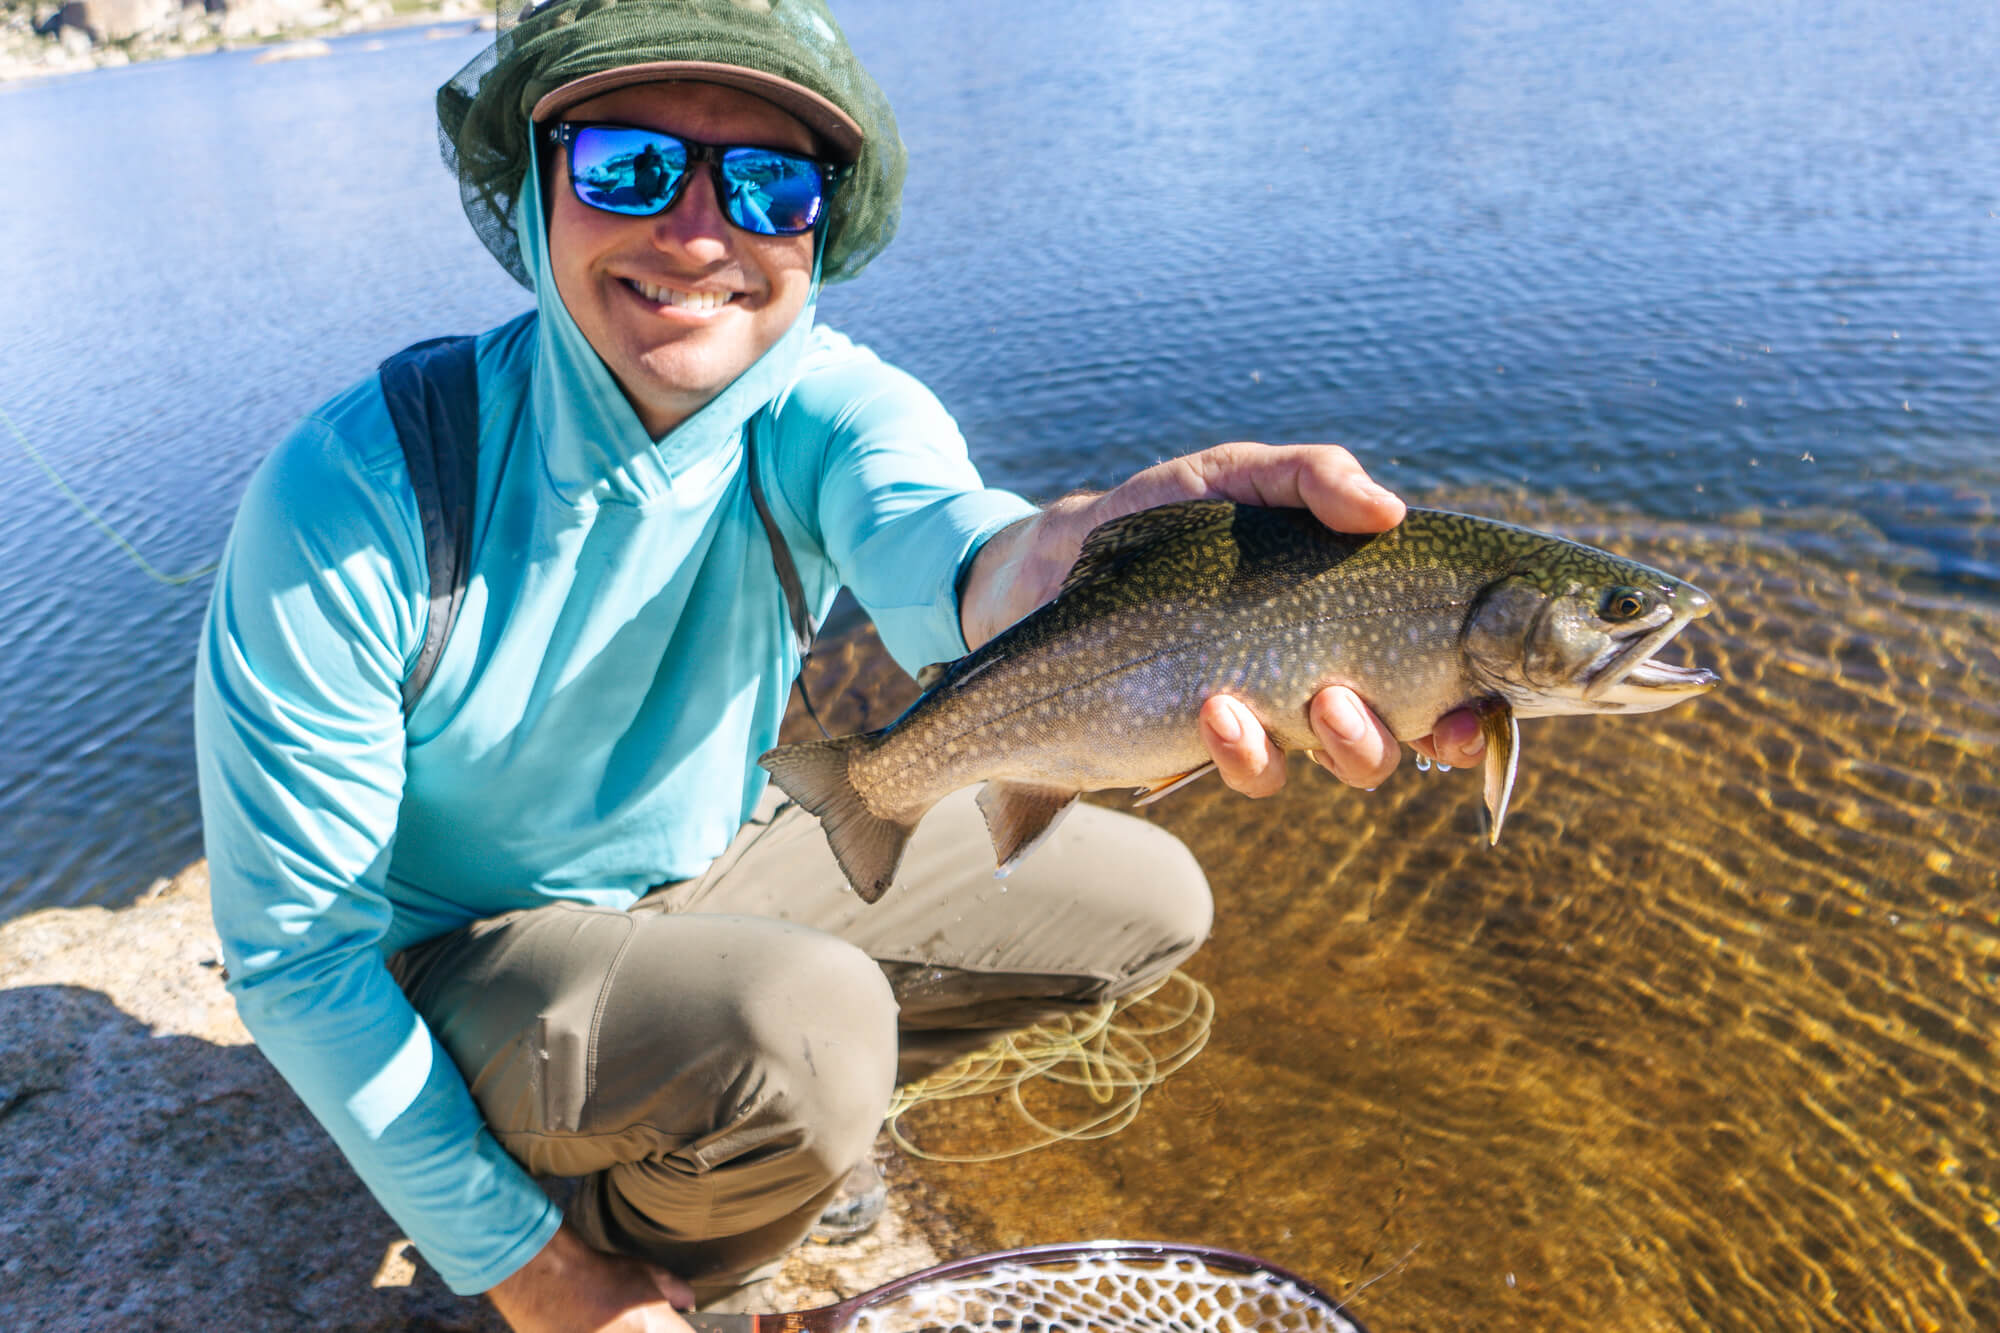 Northern California man leads fly fishing expeditions to catch